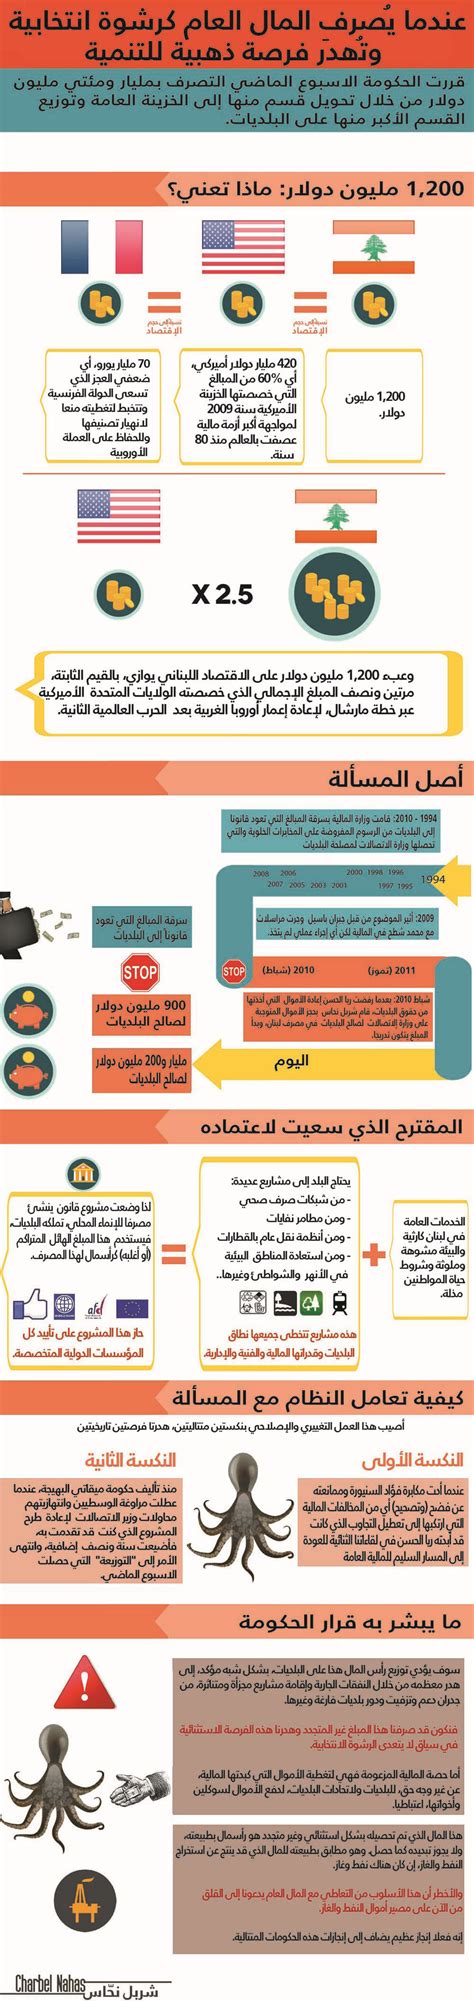 how lebanese governments are stealing citizens infographic